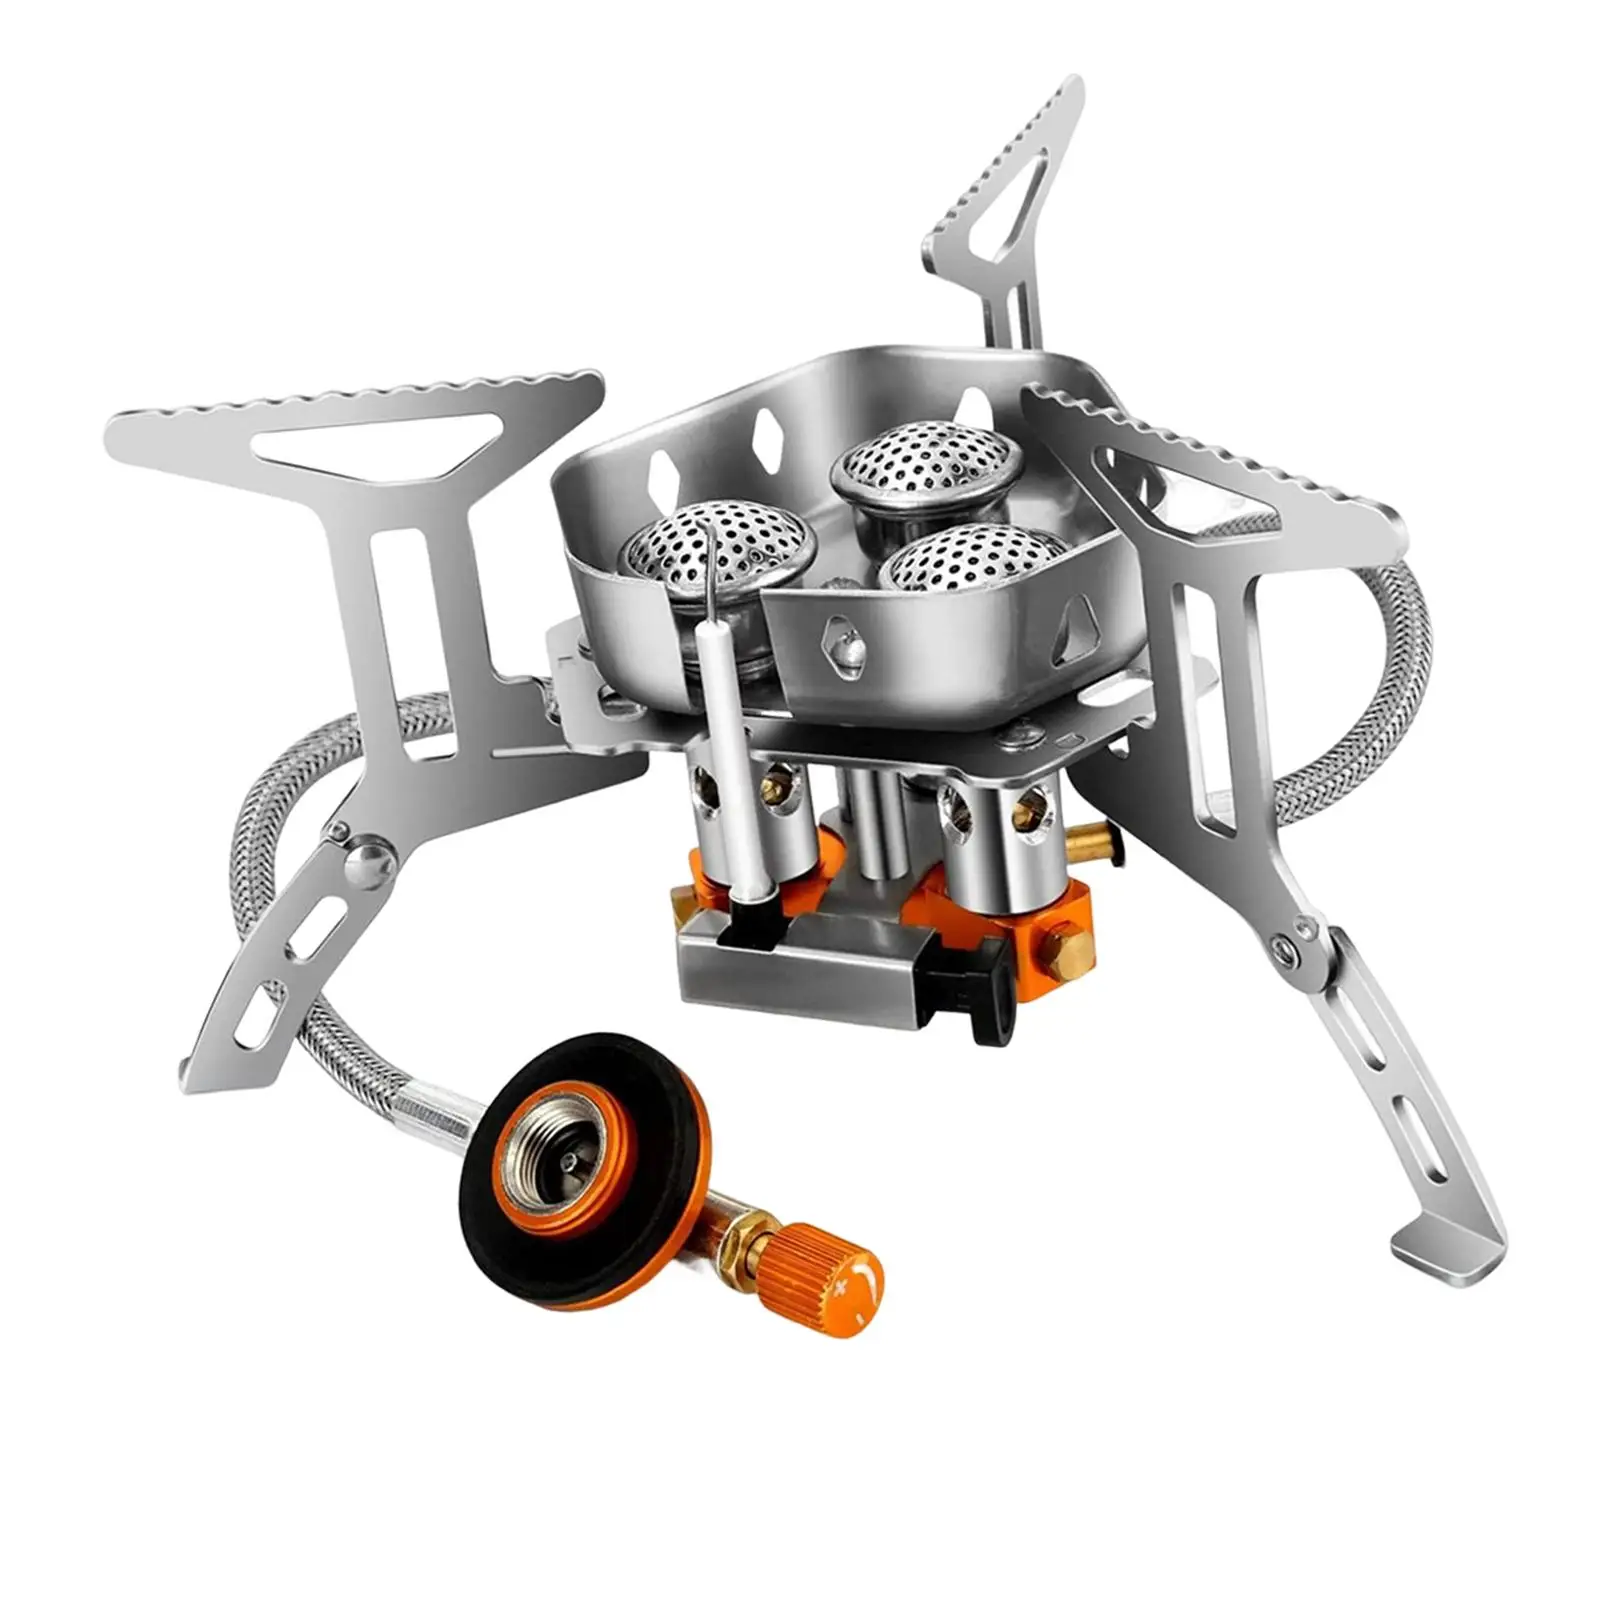 Portable Camping Gas Stove 3 Heads Mini Cookware with Adapter Windproof Lightweight Tool Mini for Travel Hiking Camping Fishing